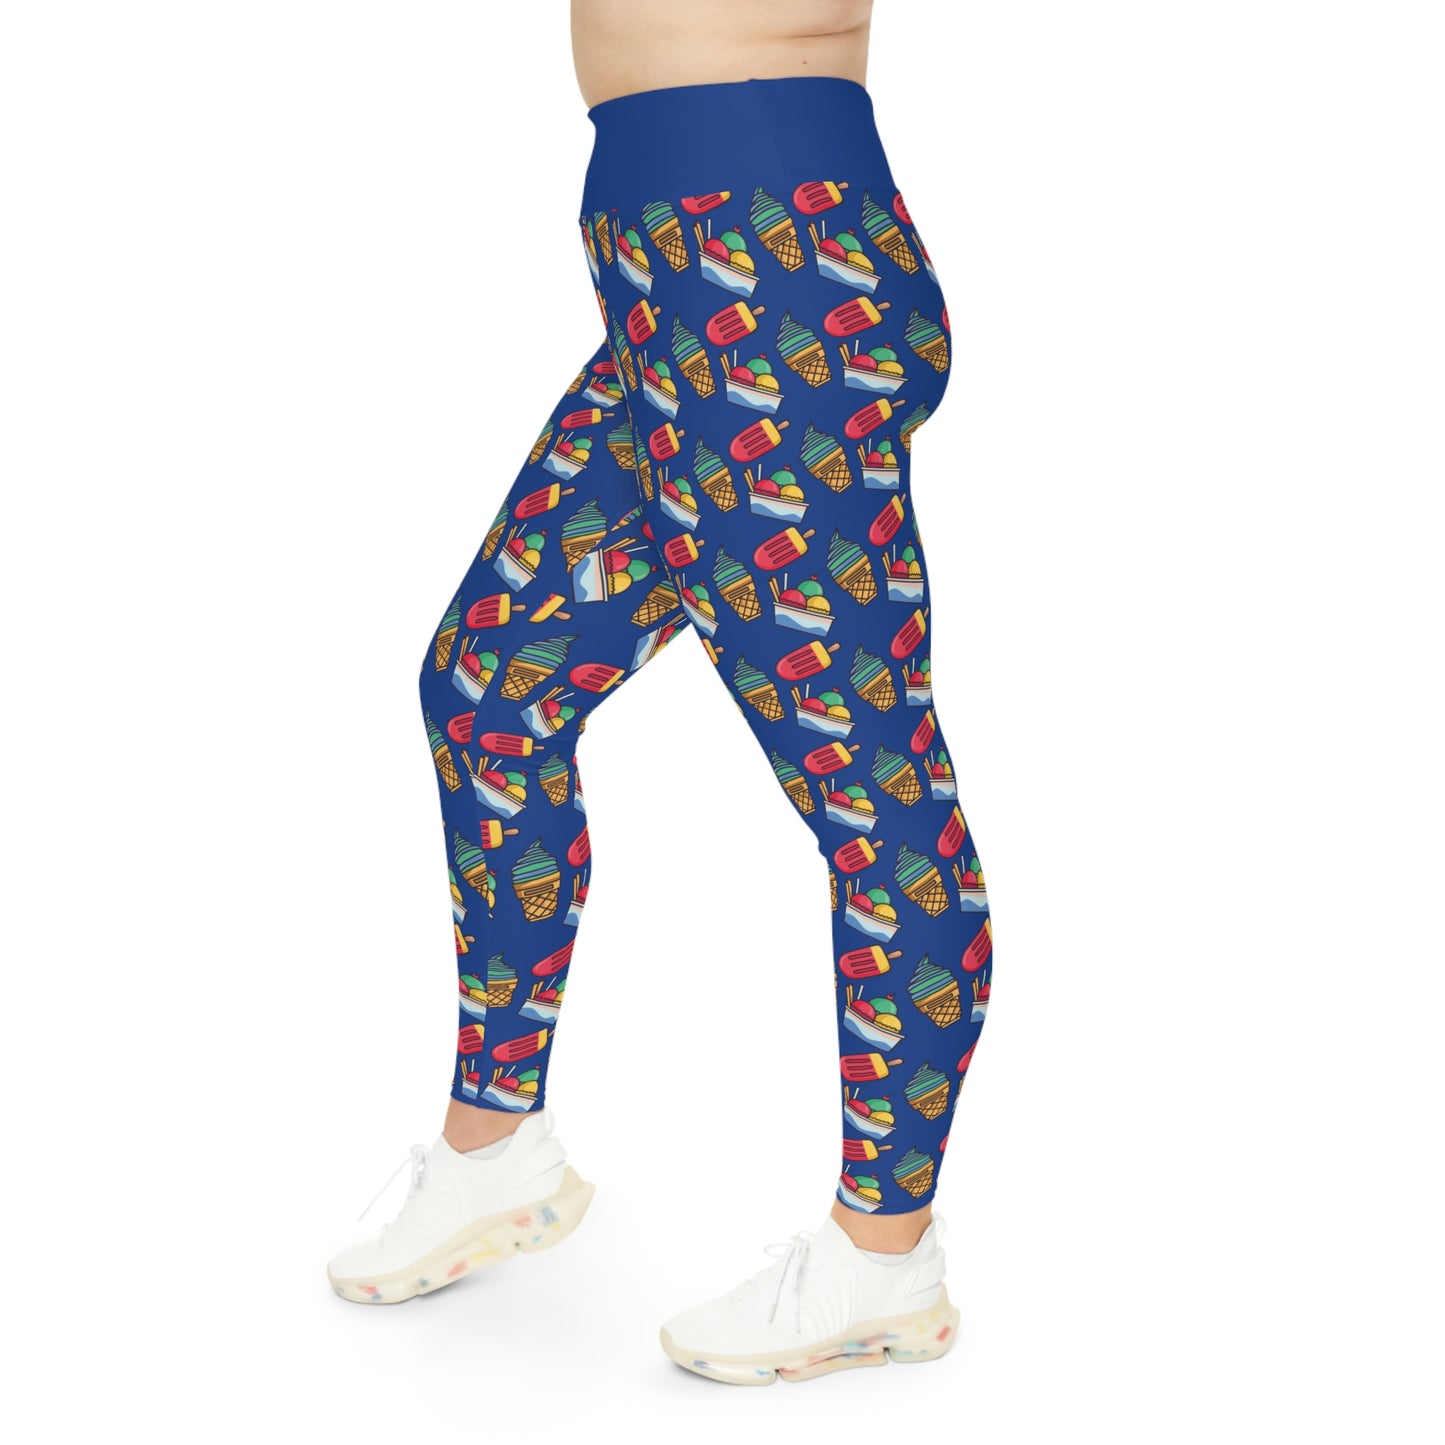 Ice Cream Scoop Cute Summer Plus Size Leggings, One of a Kind Gift - Workout Activewear tights for Mothers Day, Girlfriend